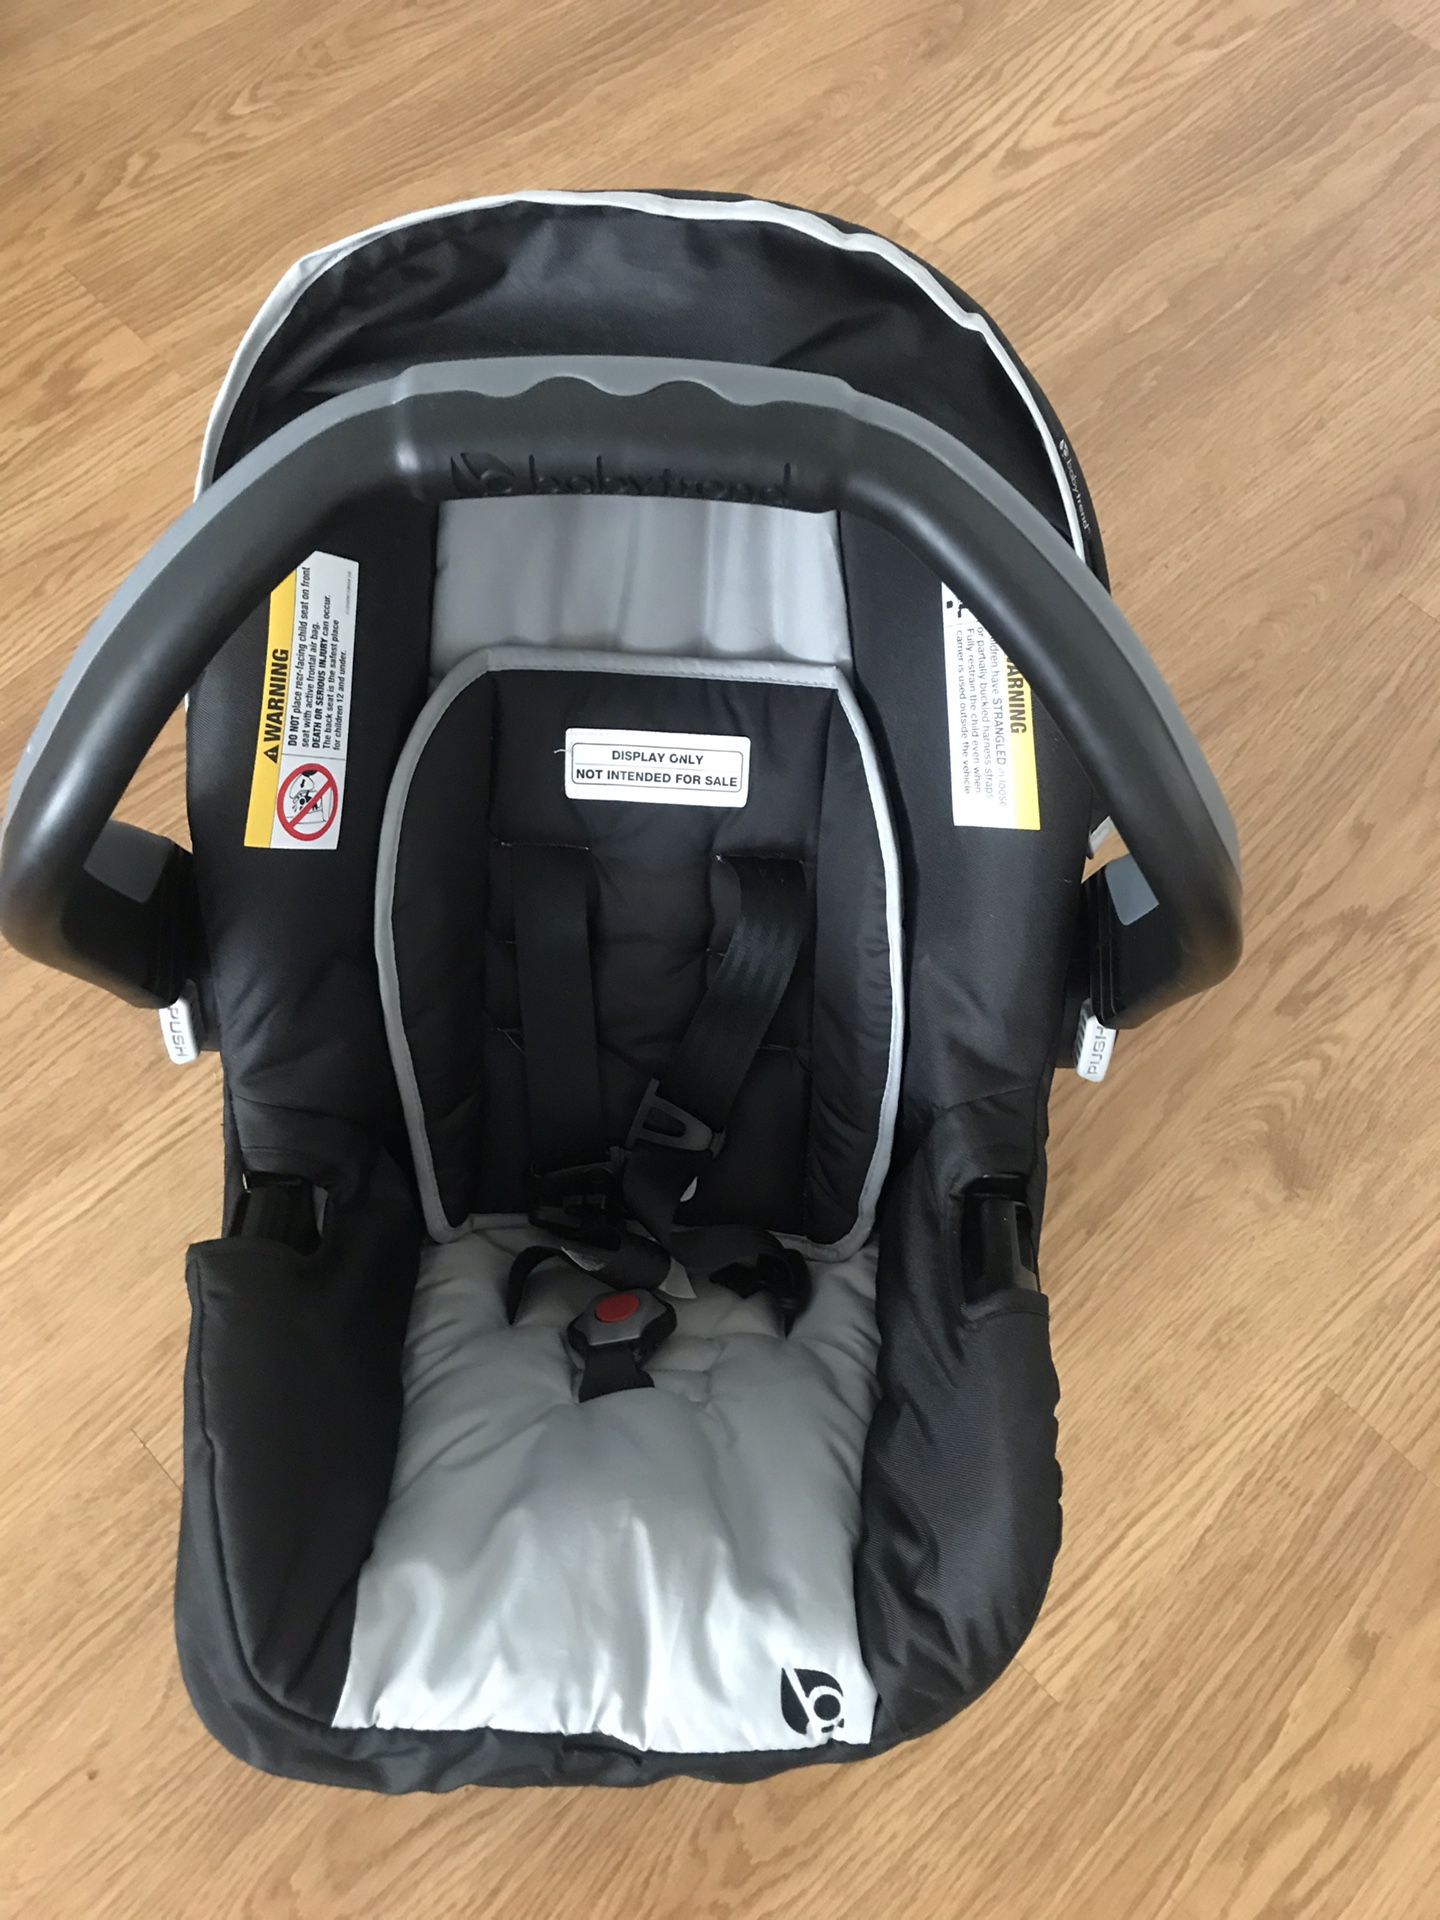 Baby car seat with the base